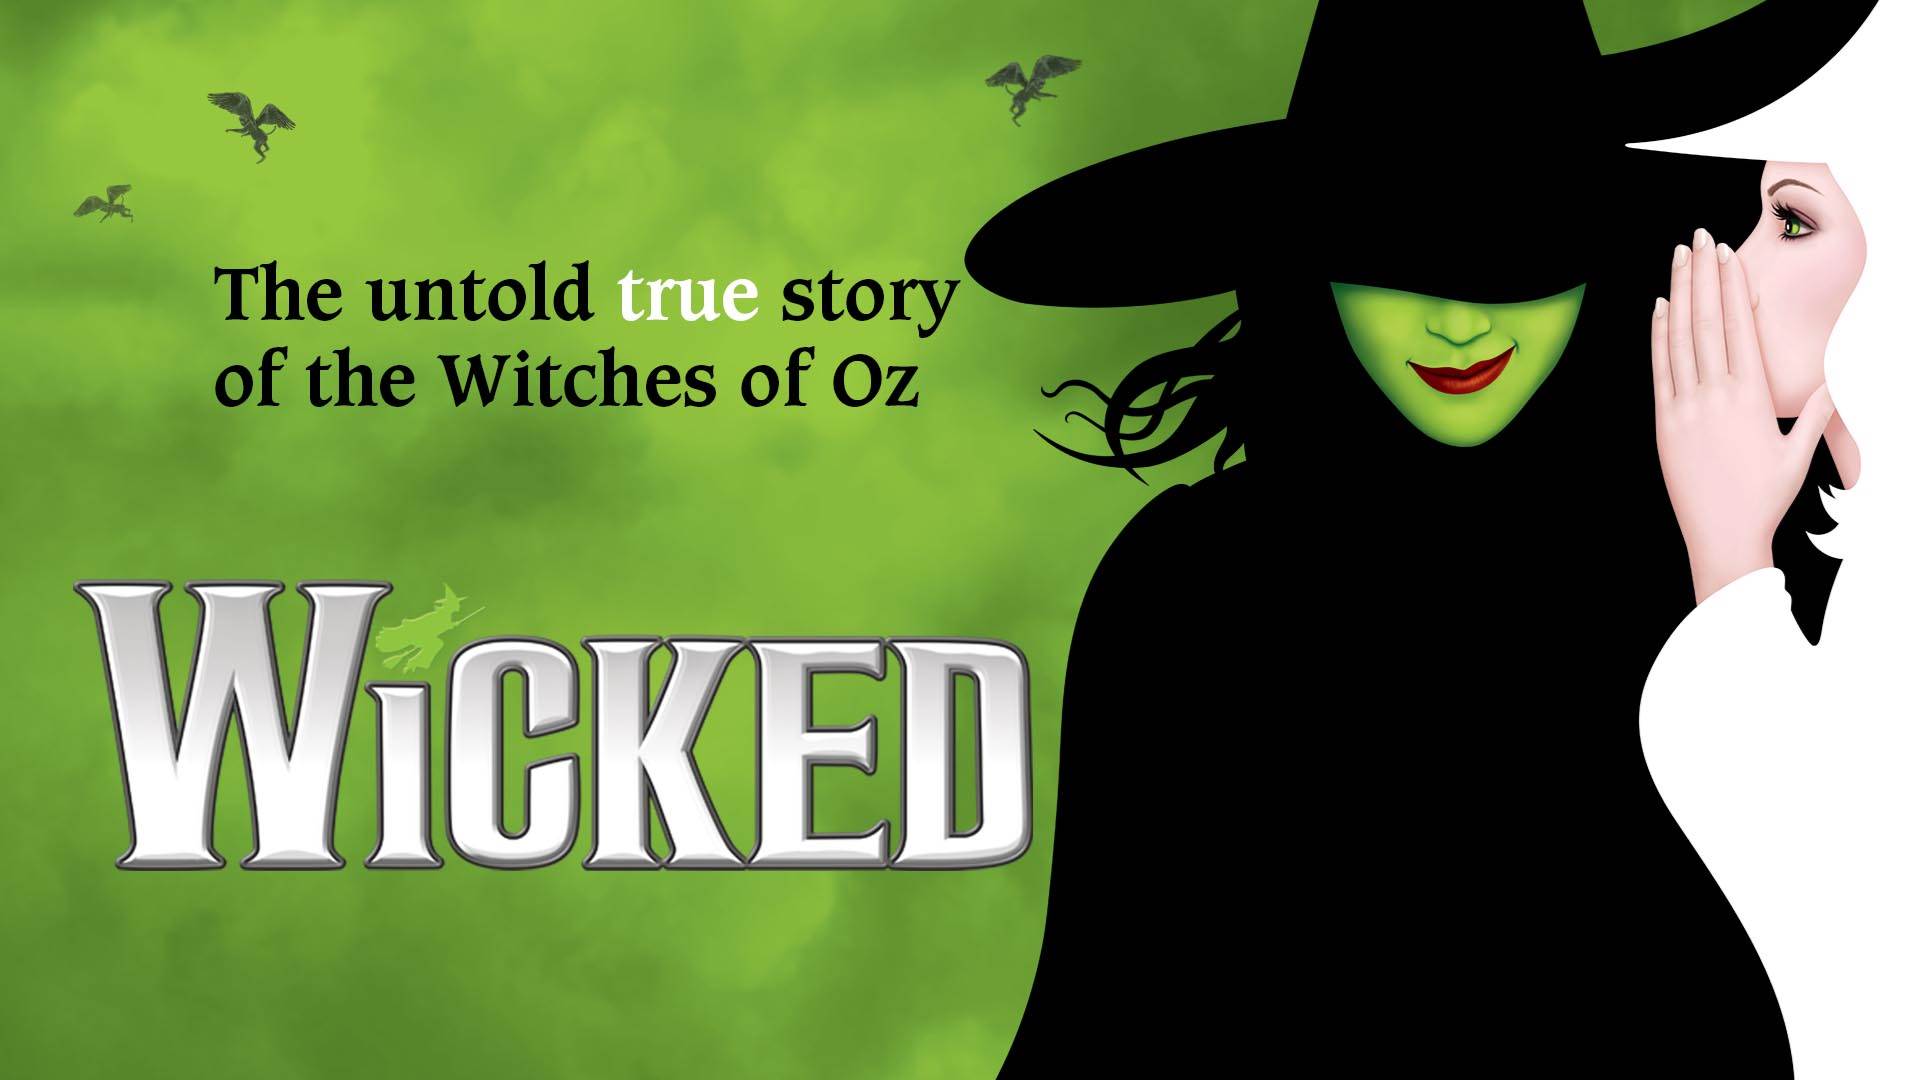 The key art for Wicked. A witch in a white robe whispering into the ear of a witch with green skin in black. The background is a cloudy green color. The text reads "Wicked: The untold true story of the witches of Oz."